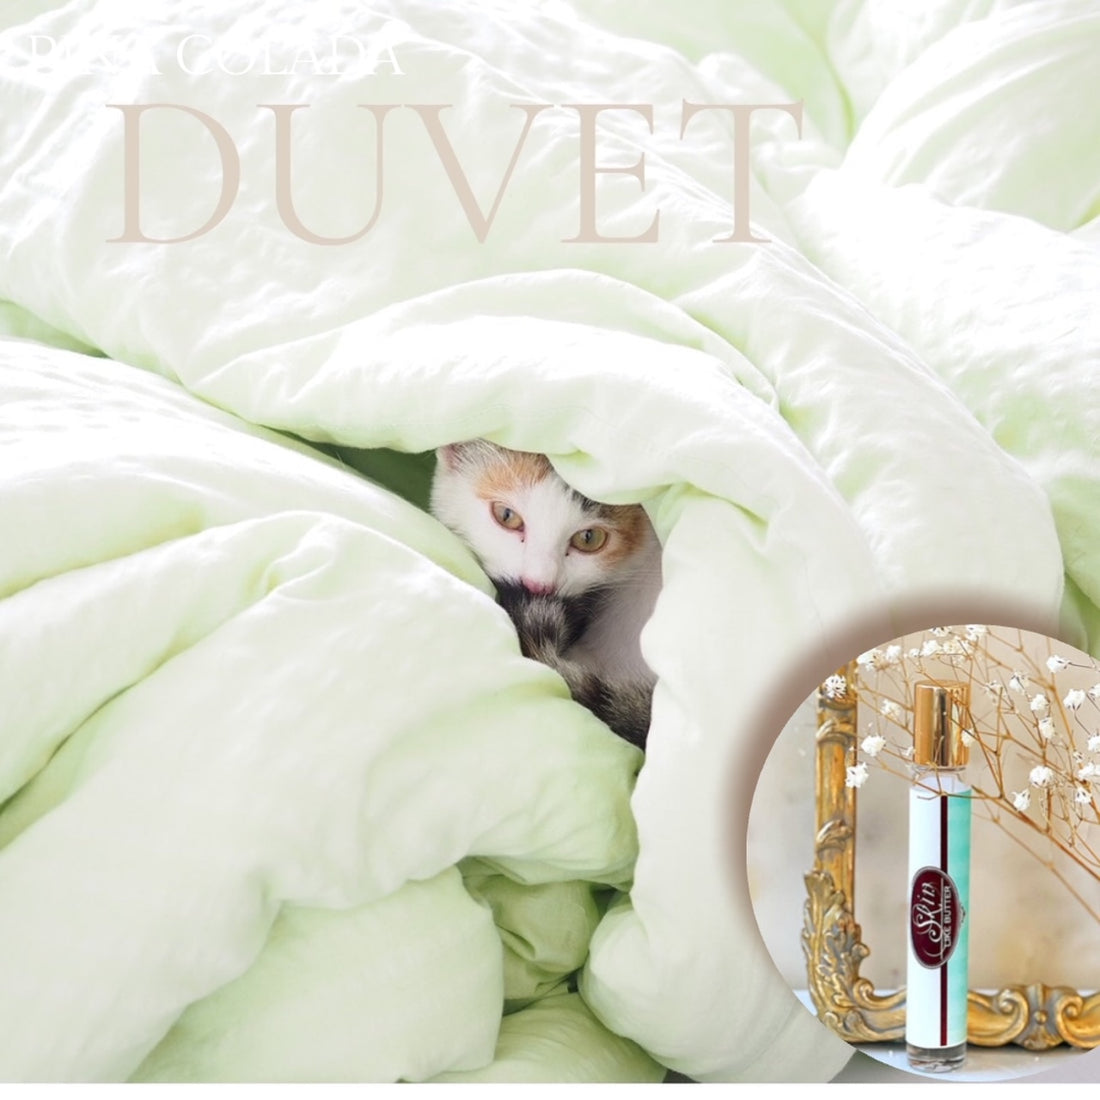 DUVET Roll On Travel Perfume in a Roll on or Spray bottle